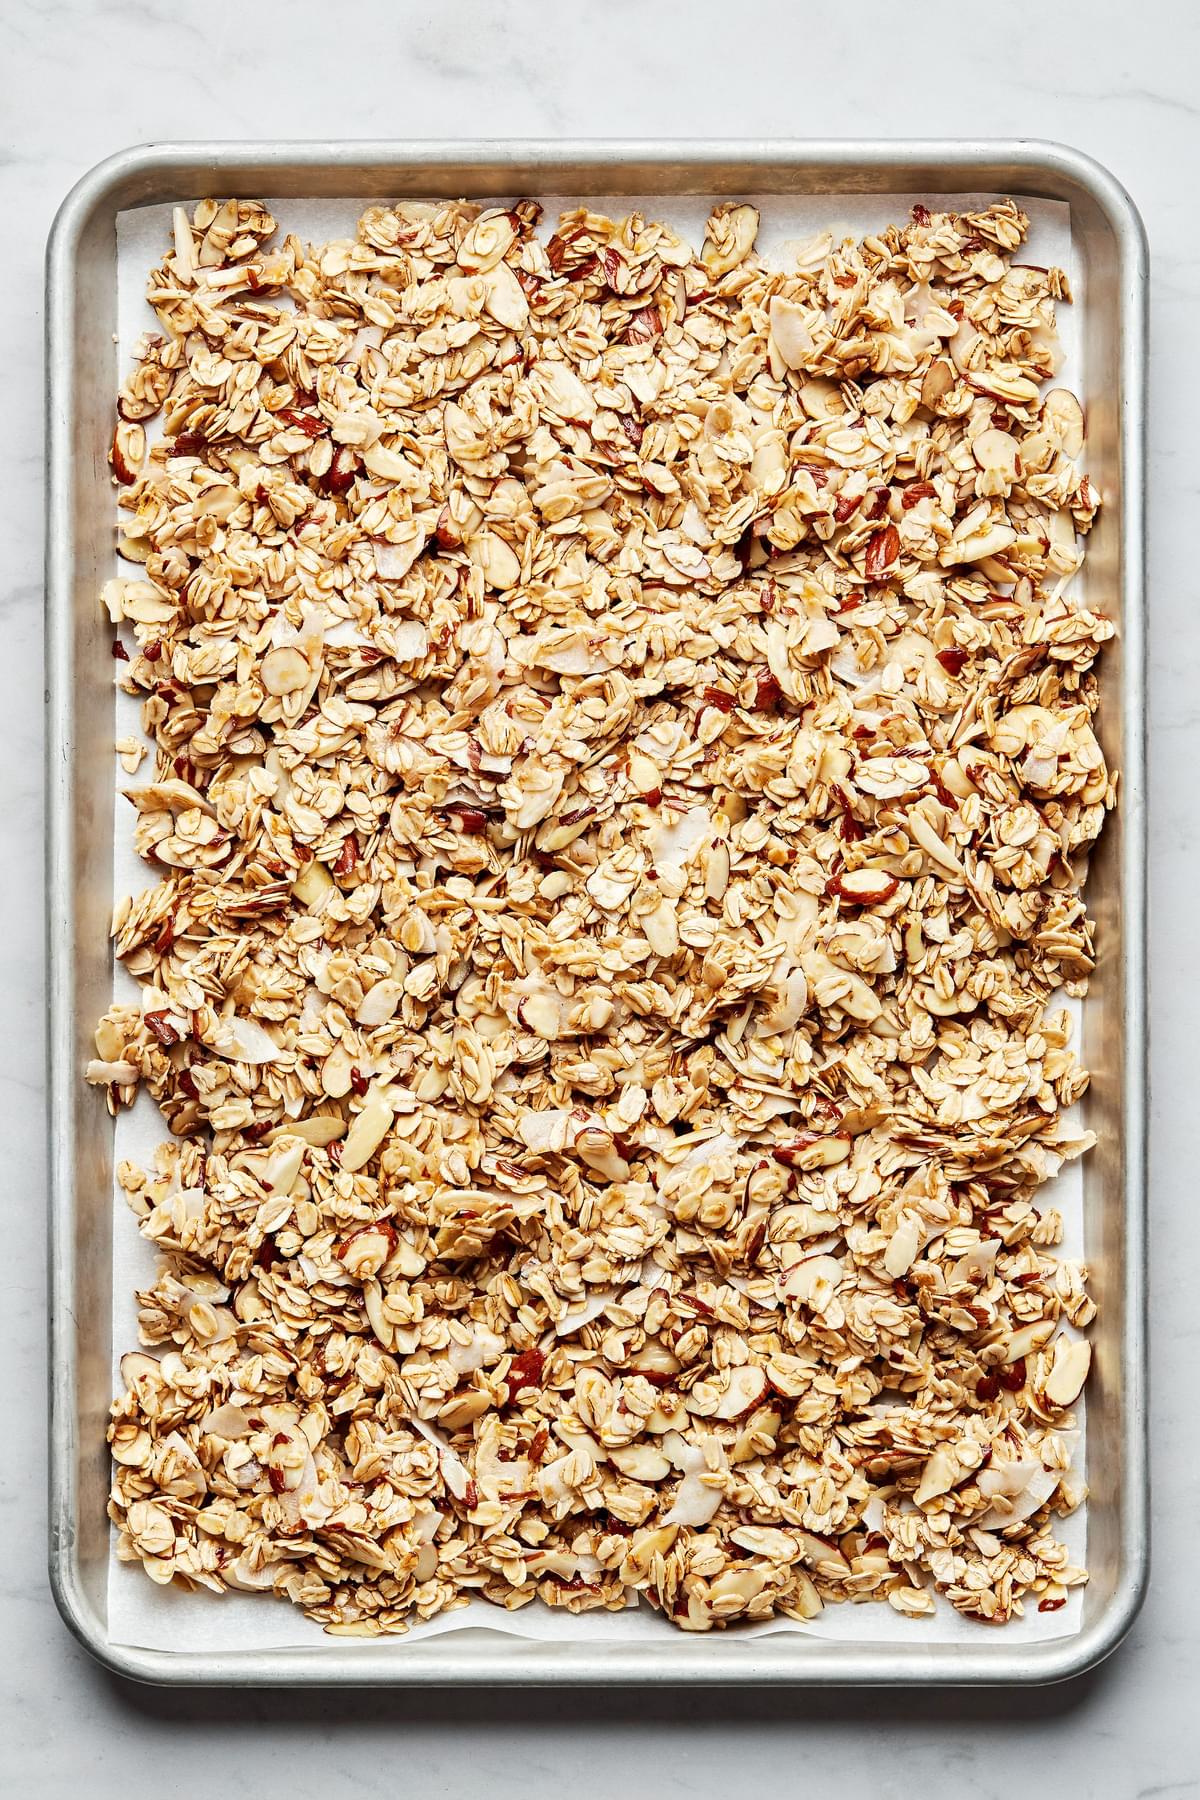 easy homemade granola baked in the oven on a parchment lined baking sheet made with oats, almonds, brown sugar and maple